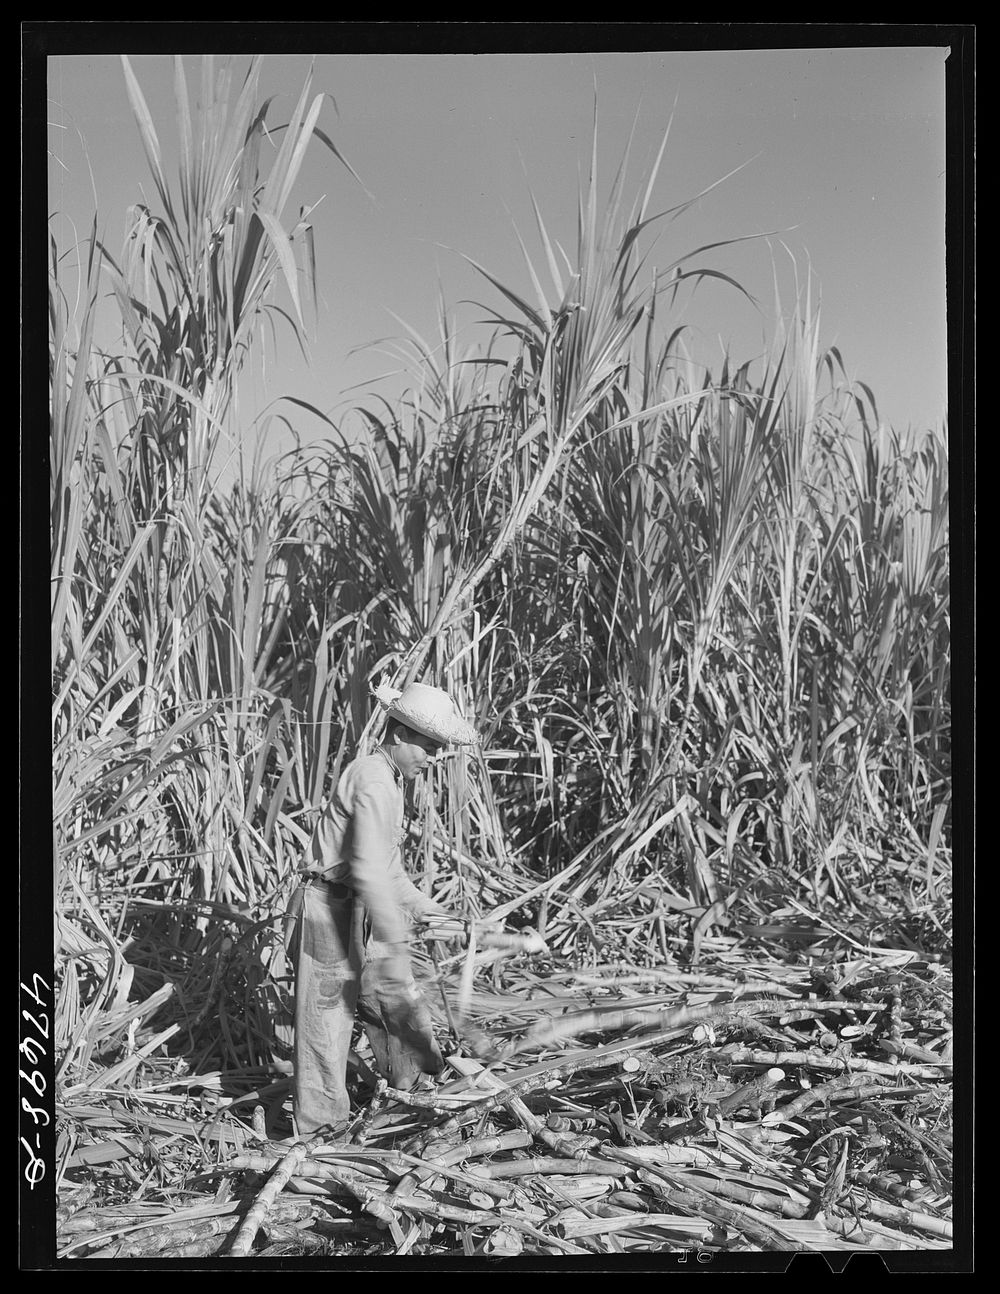 [Untitled photo, possibly related to: Yauco, Puerto Rico (vicinity). Harvesting cane in a sugar cane field]. Sourced from…